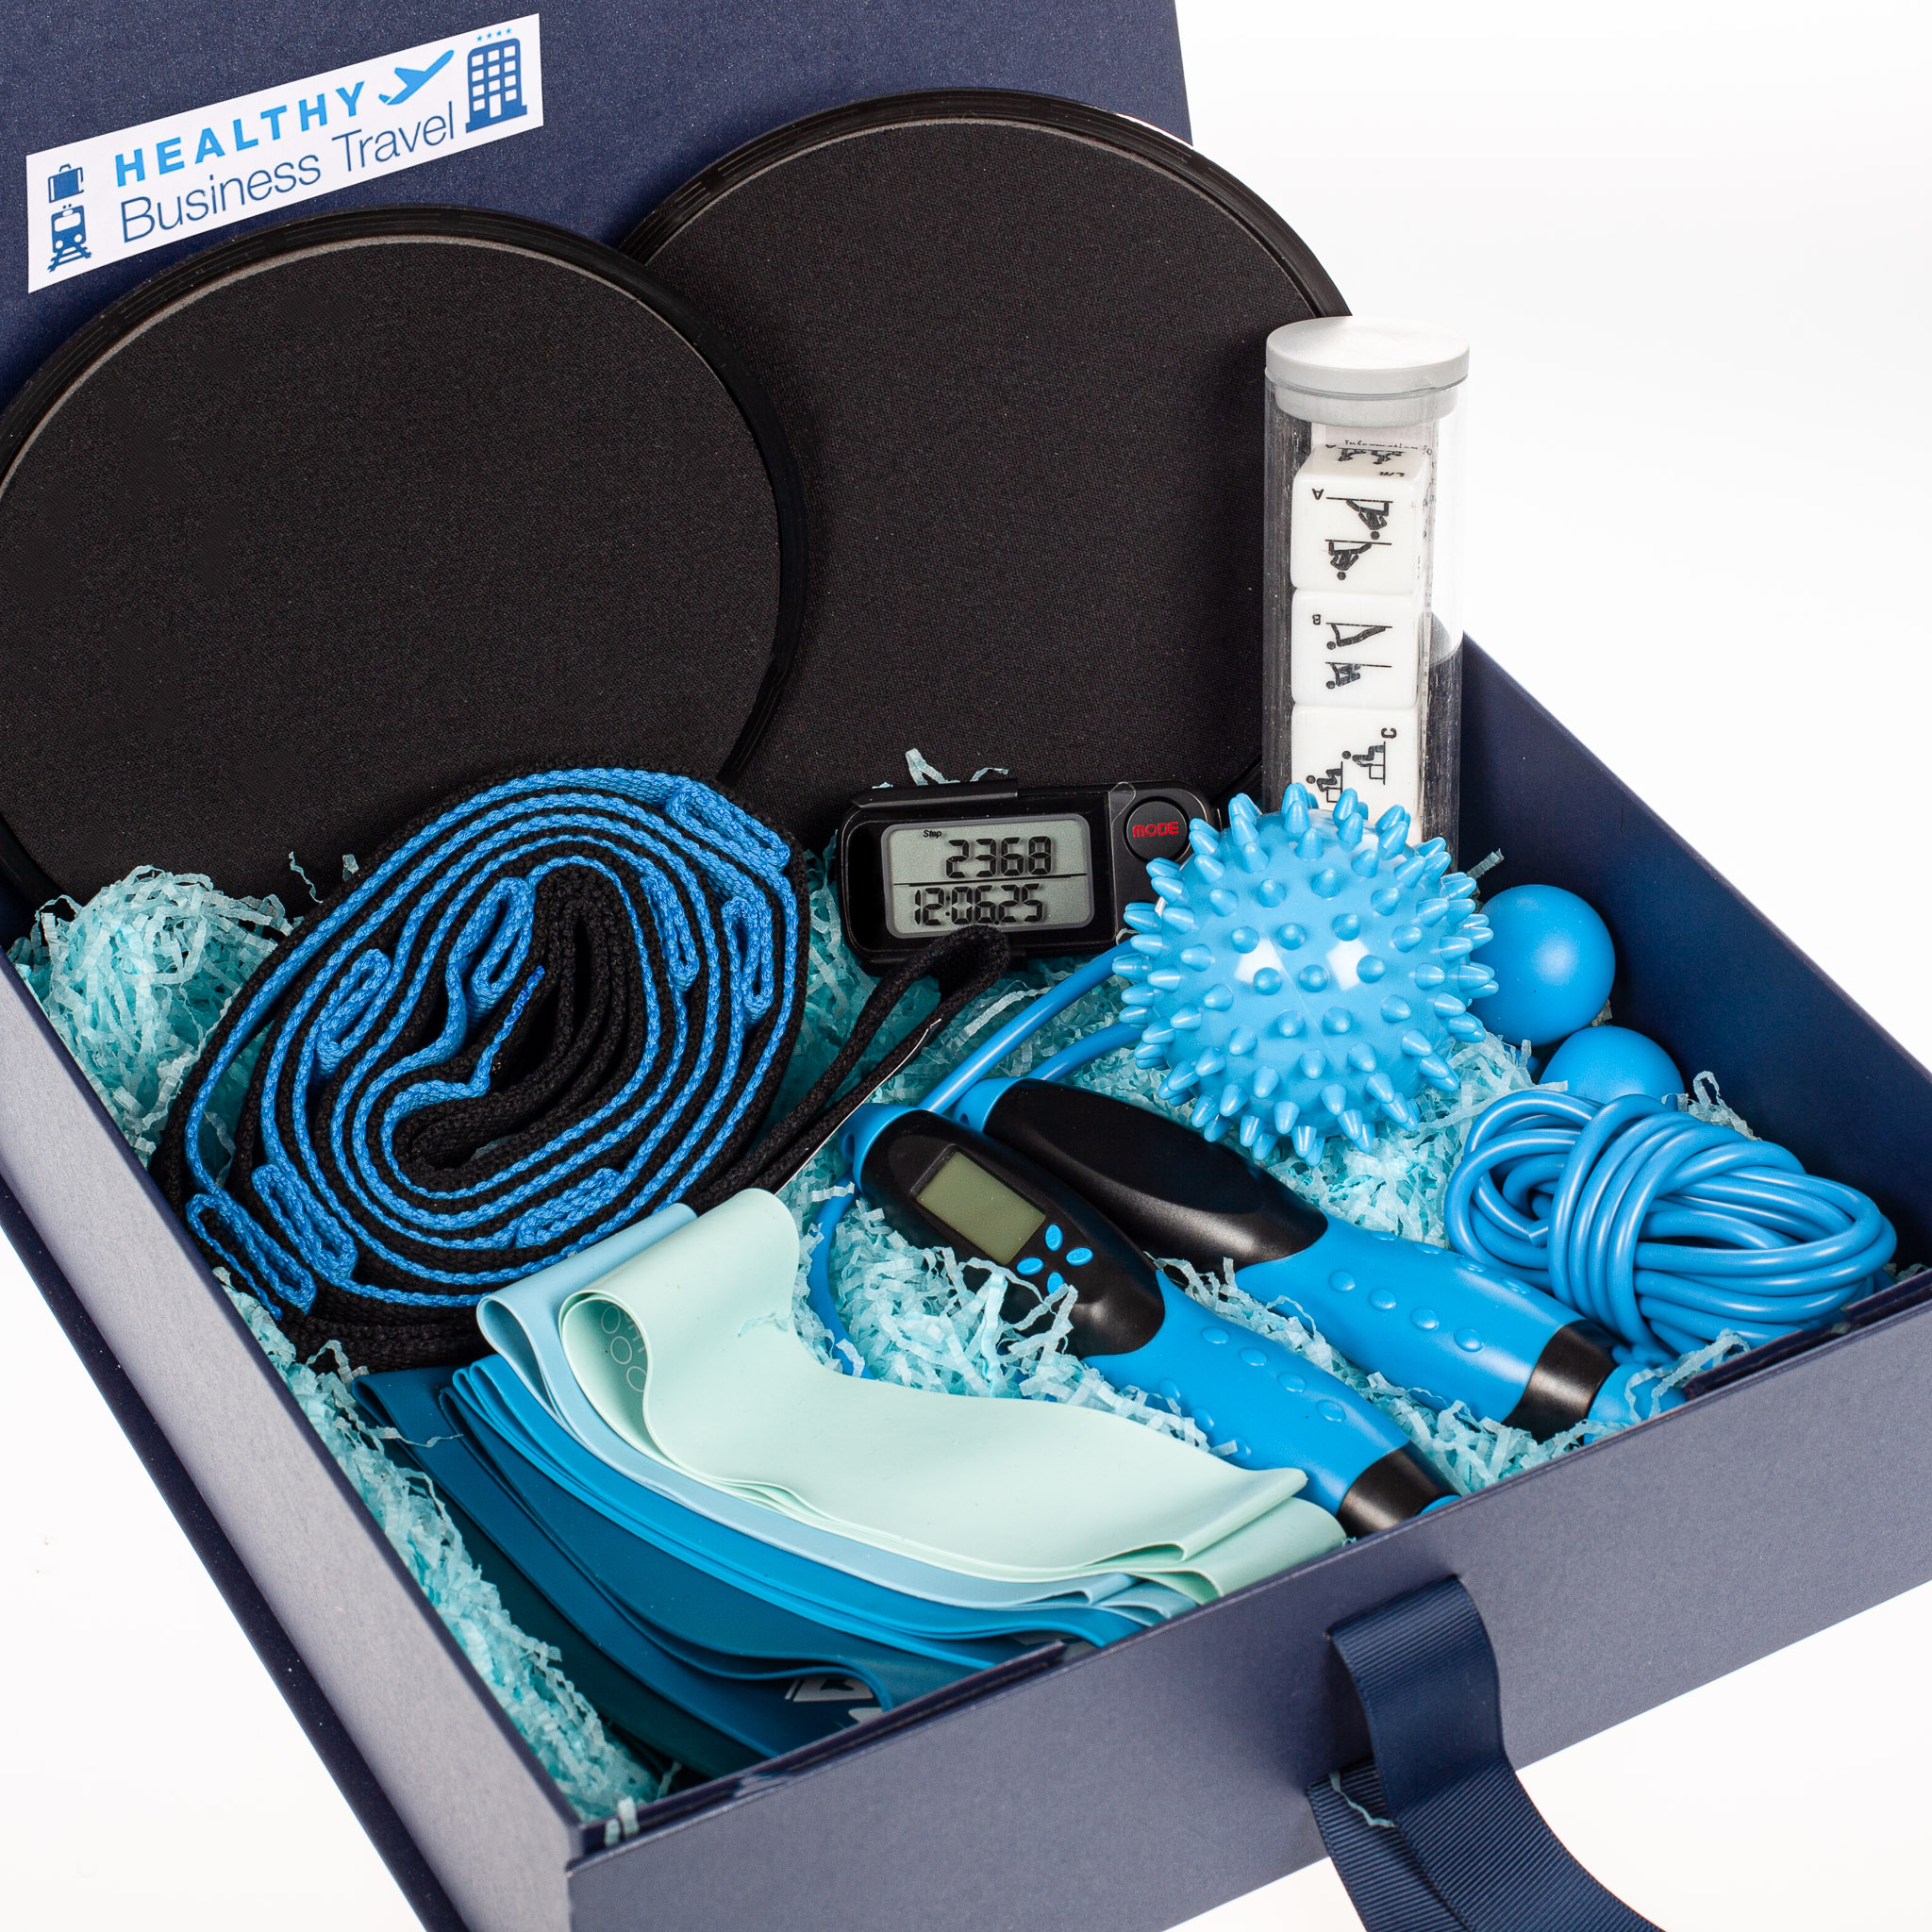 25 Corporate Gift Boxes for the Person Who Has Everything